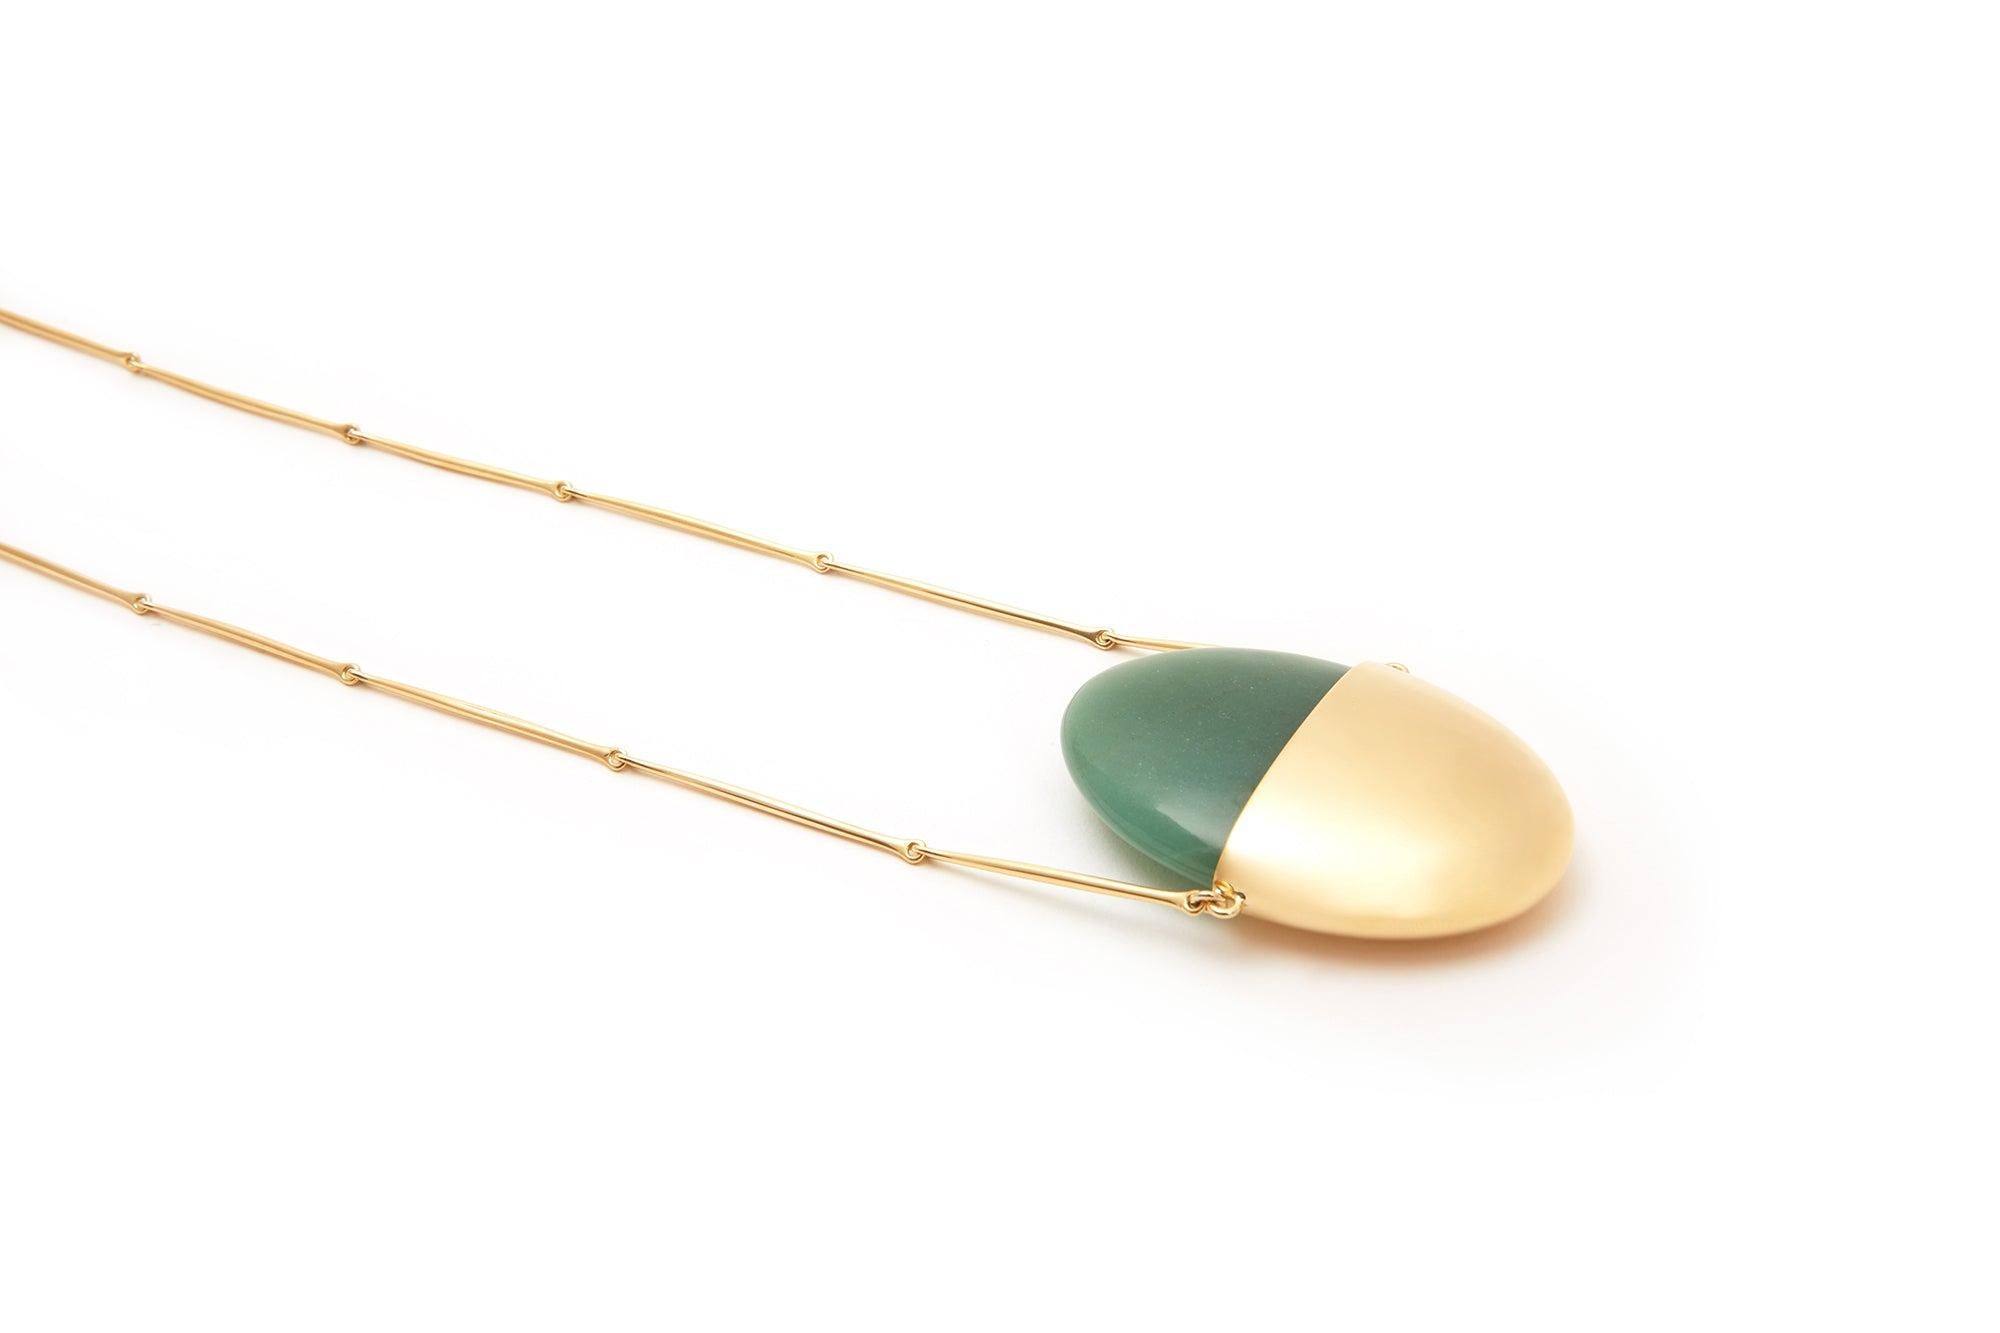 Jacqueline Rabun 
'A Beautiful Life' Small Pendant  
18k Yellow Gold and Aventurine

The meditation pendant embraces a sculptural hand carved gemstone which can be removed and held for comfort during moments of stillness and